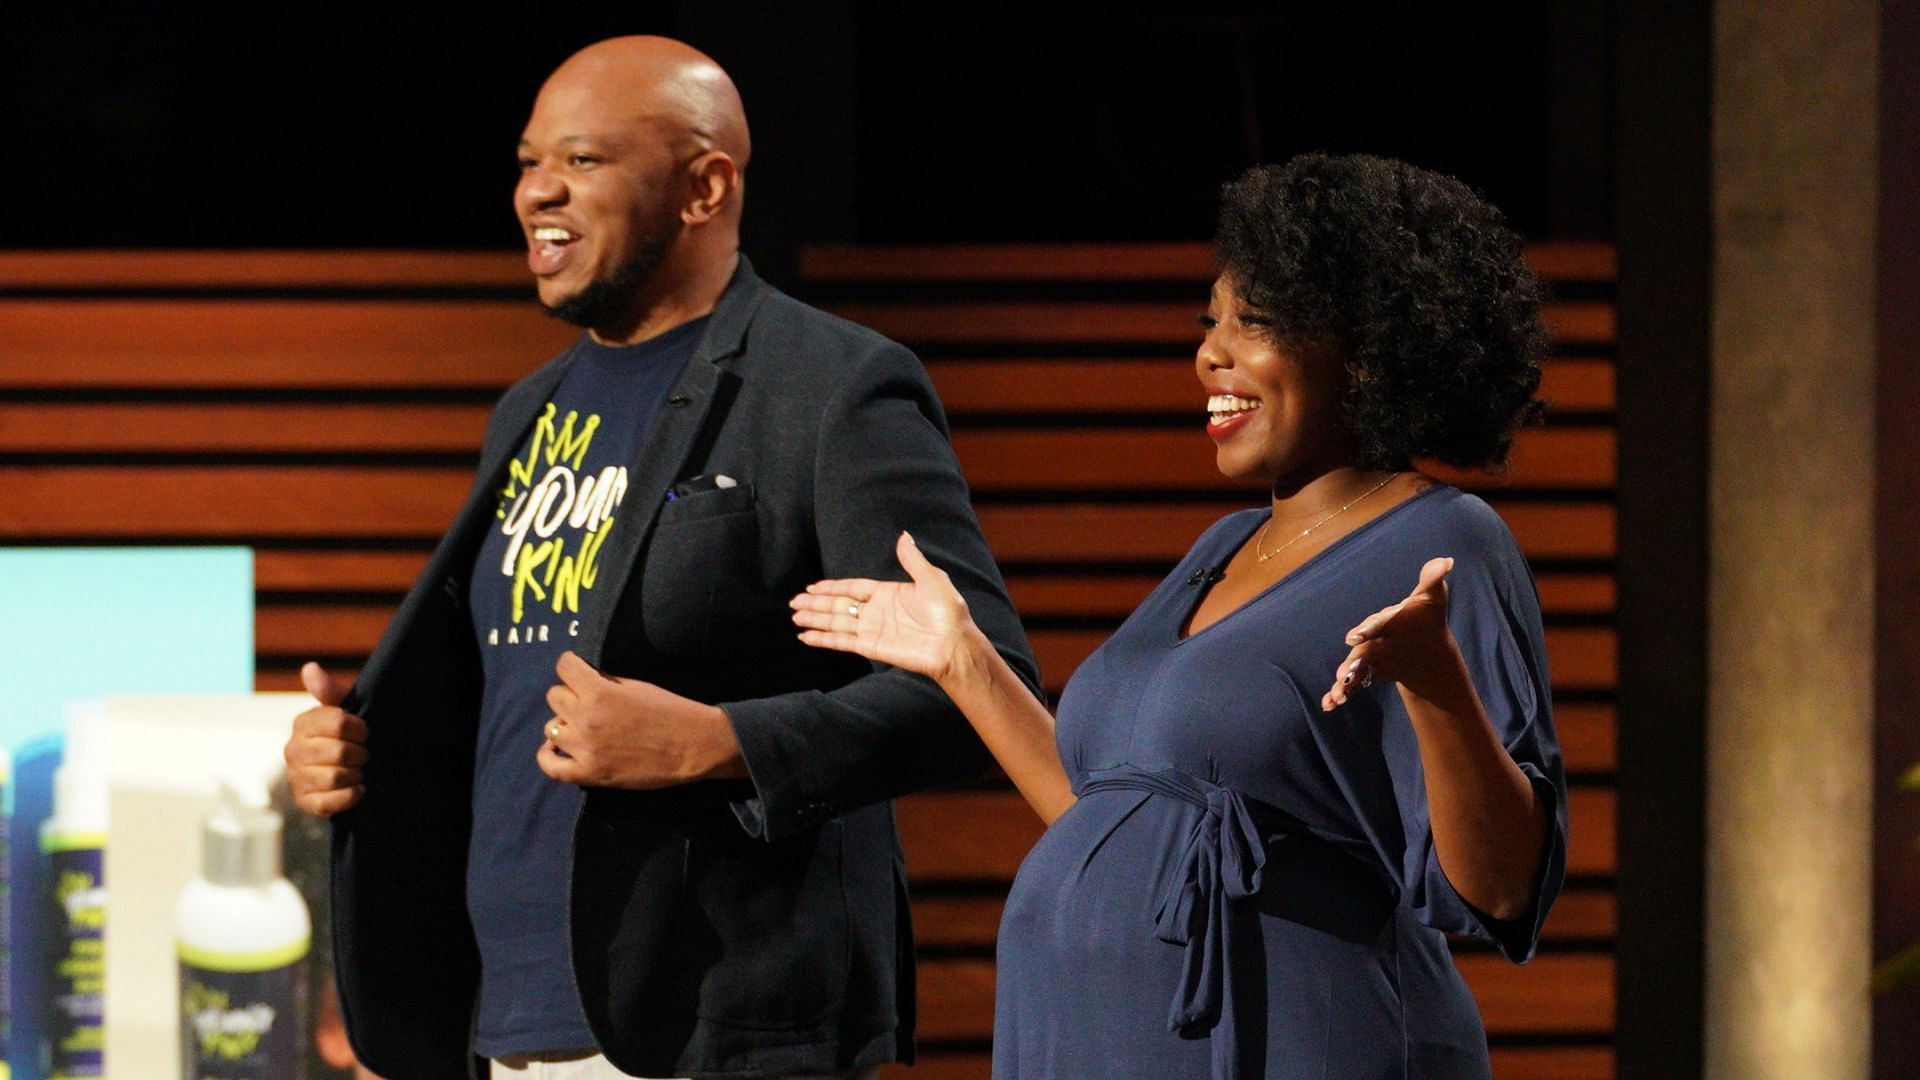 Young King Hair Care founders Stefan and Cora Miller appear on Shark Tank (Image via Christopher Willard/ABC)